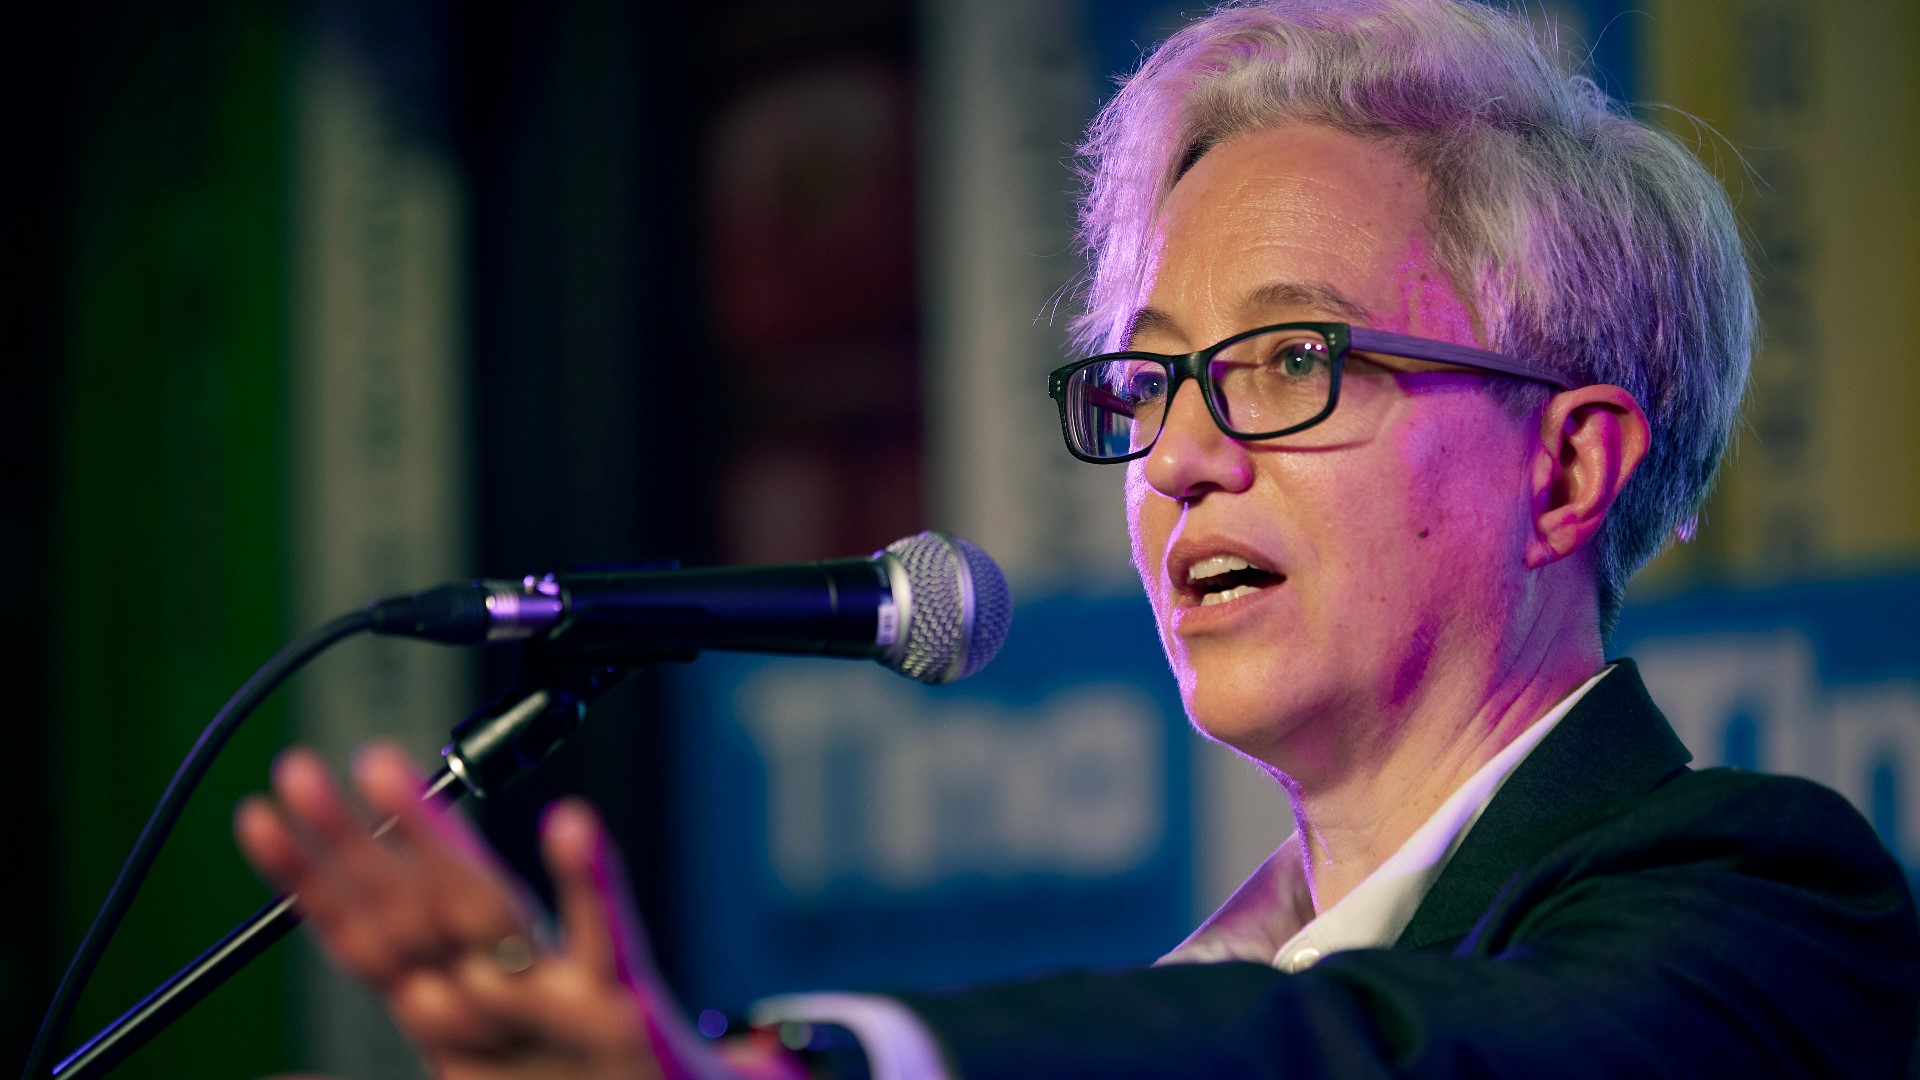 In her victory speech, Tina Kotek stressed abortion, climate and labor protections, while working on solutions for the homeless, addiction and gun violence crises.